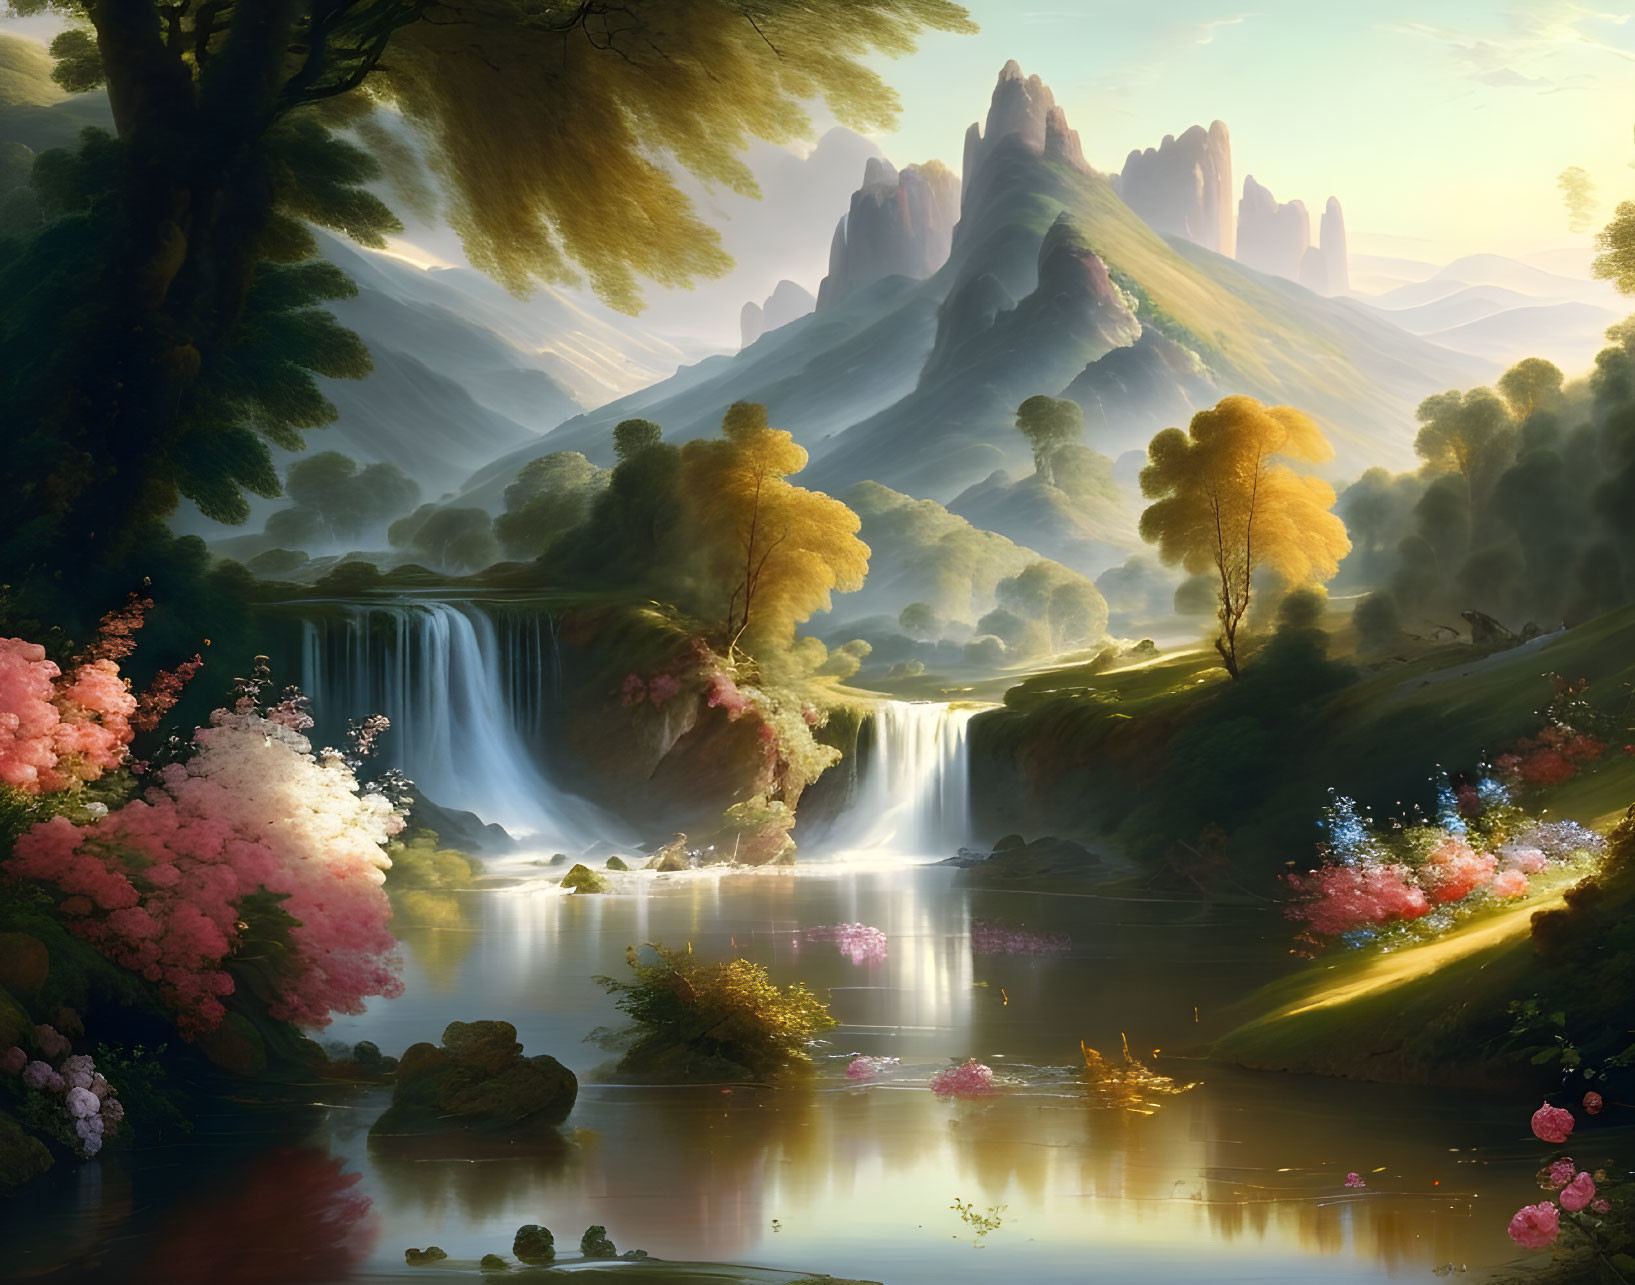 Tranquil landscape with waterfall, river, blooming trees, and mountain peaks